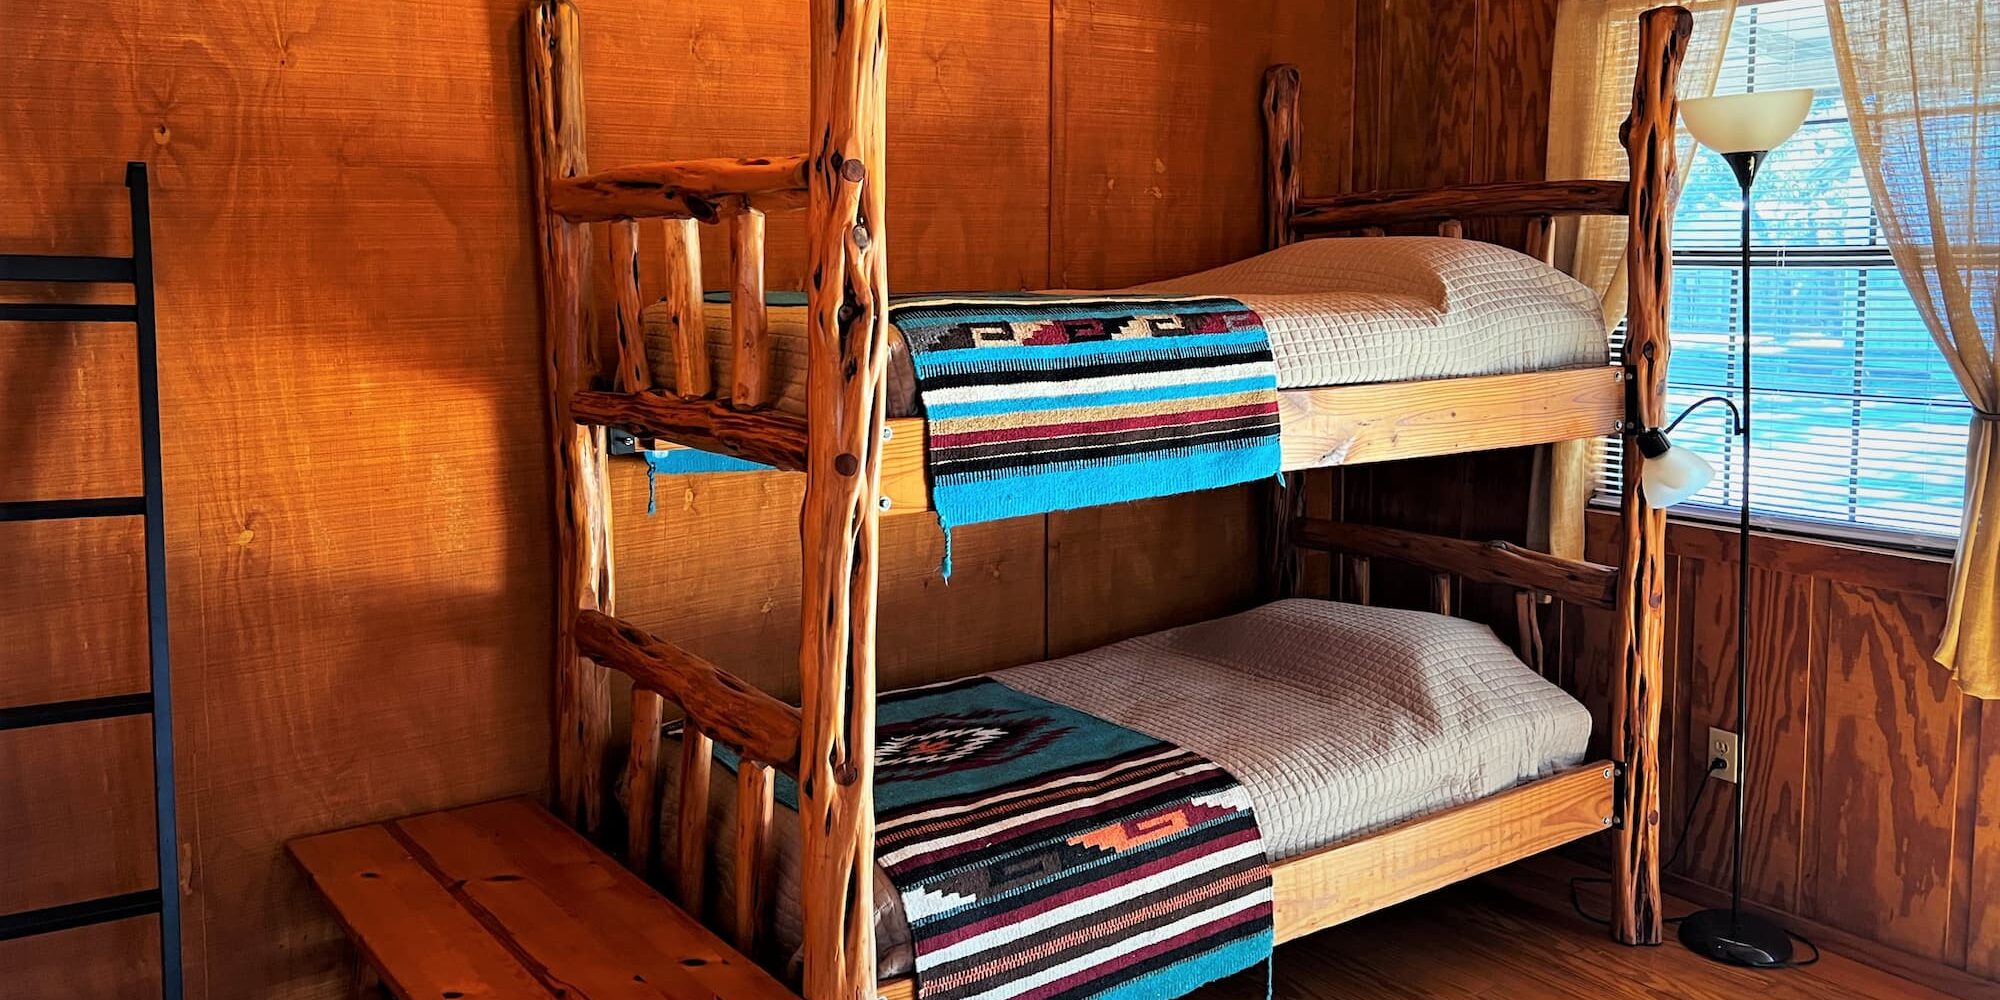 Bunkbeds in a guest cabin are fitted with bright turquoise western style bedding, a ladder sits propped against the wall.